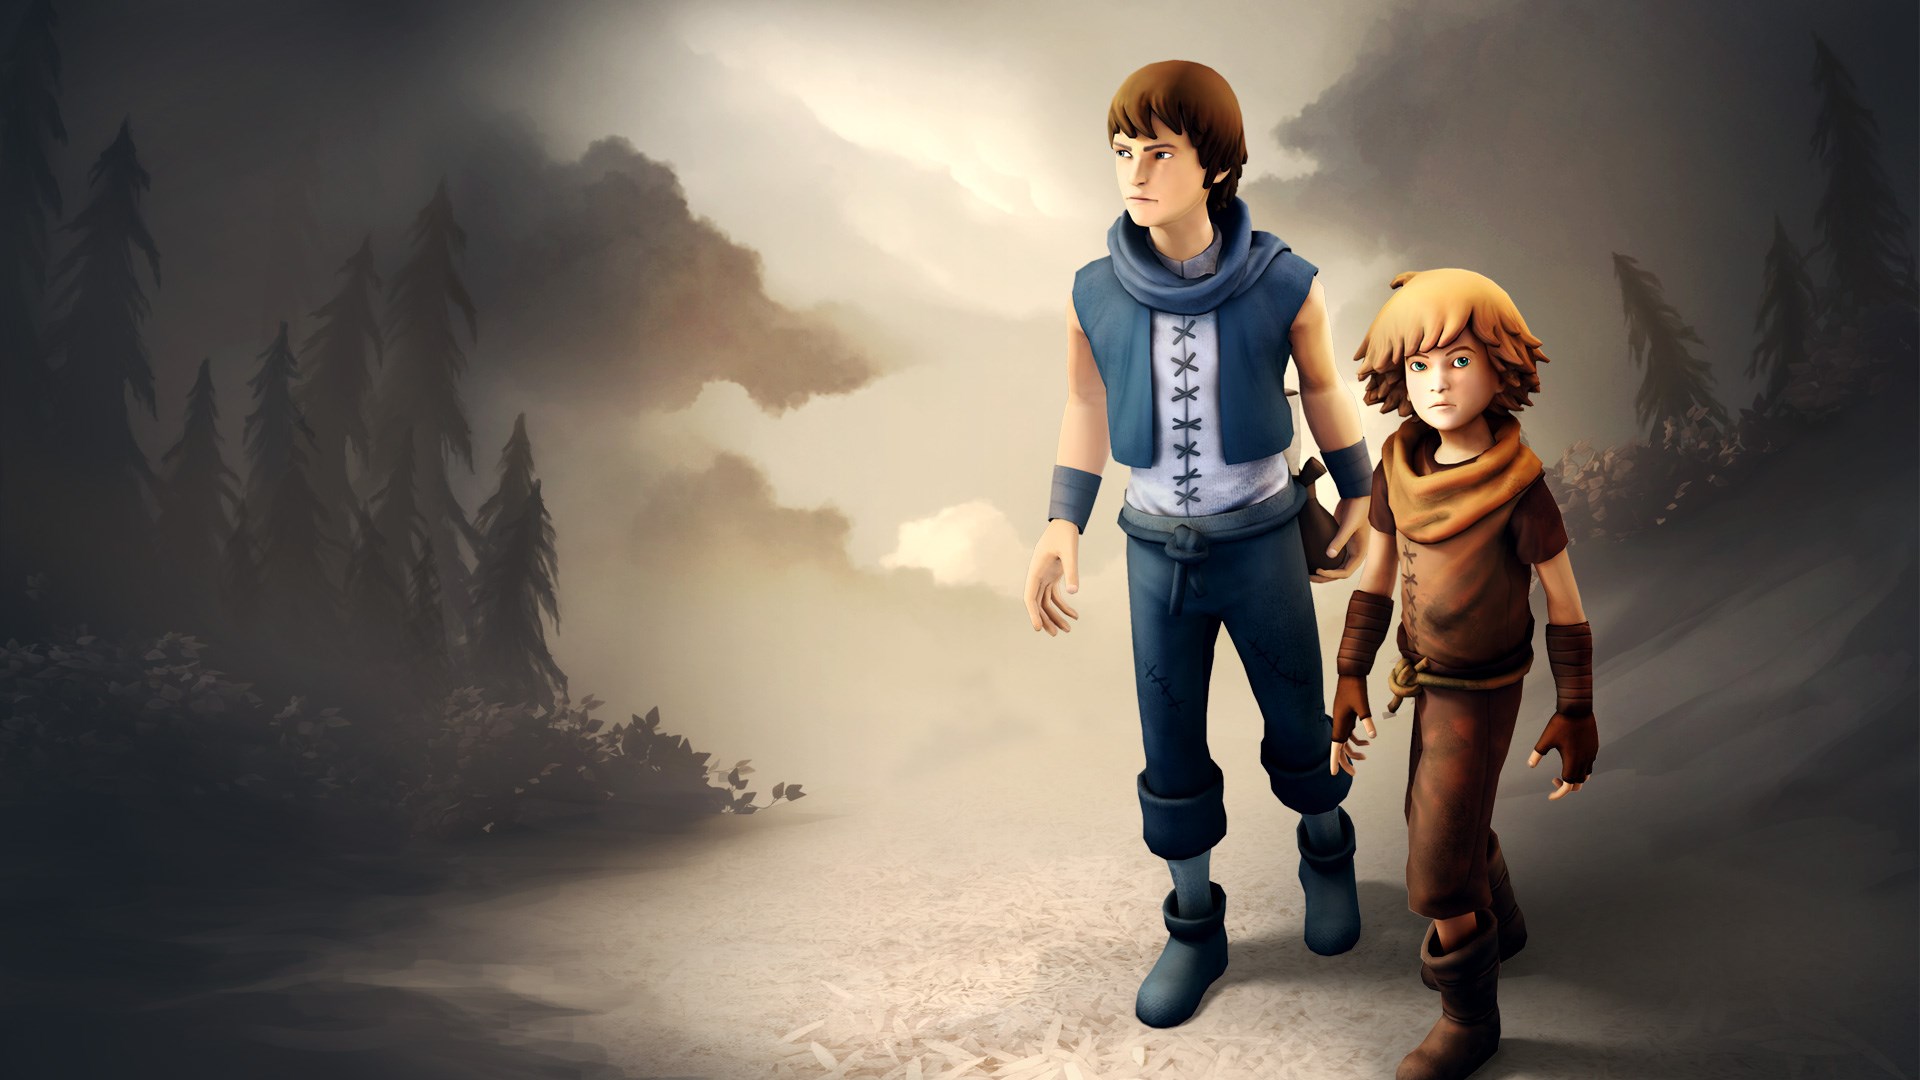 brothers a tale of two sons xbox one